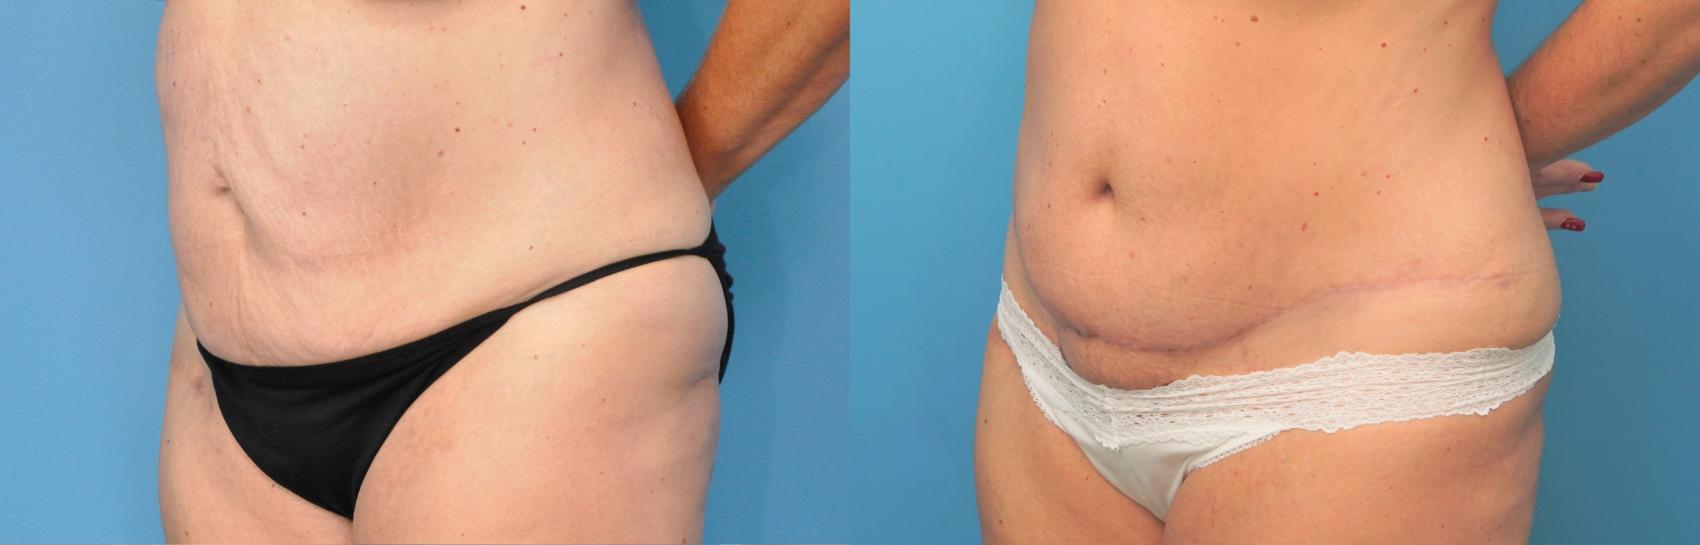 Before & After Abdominoplasty/Tummy Tuck Case 269 Front View in Northbrook, IL